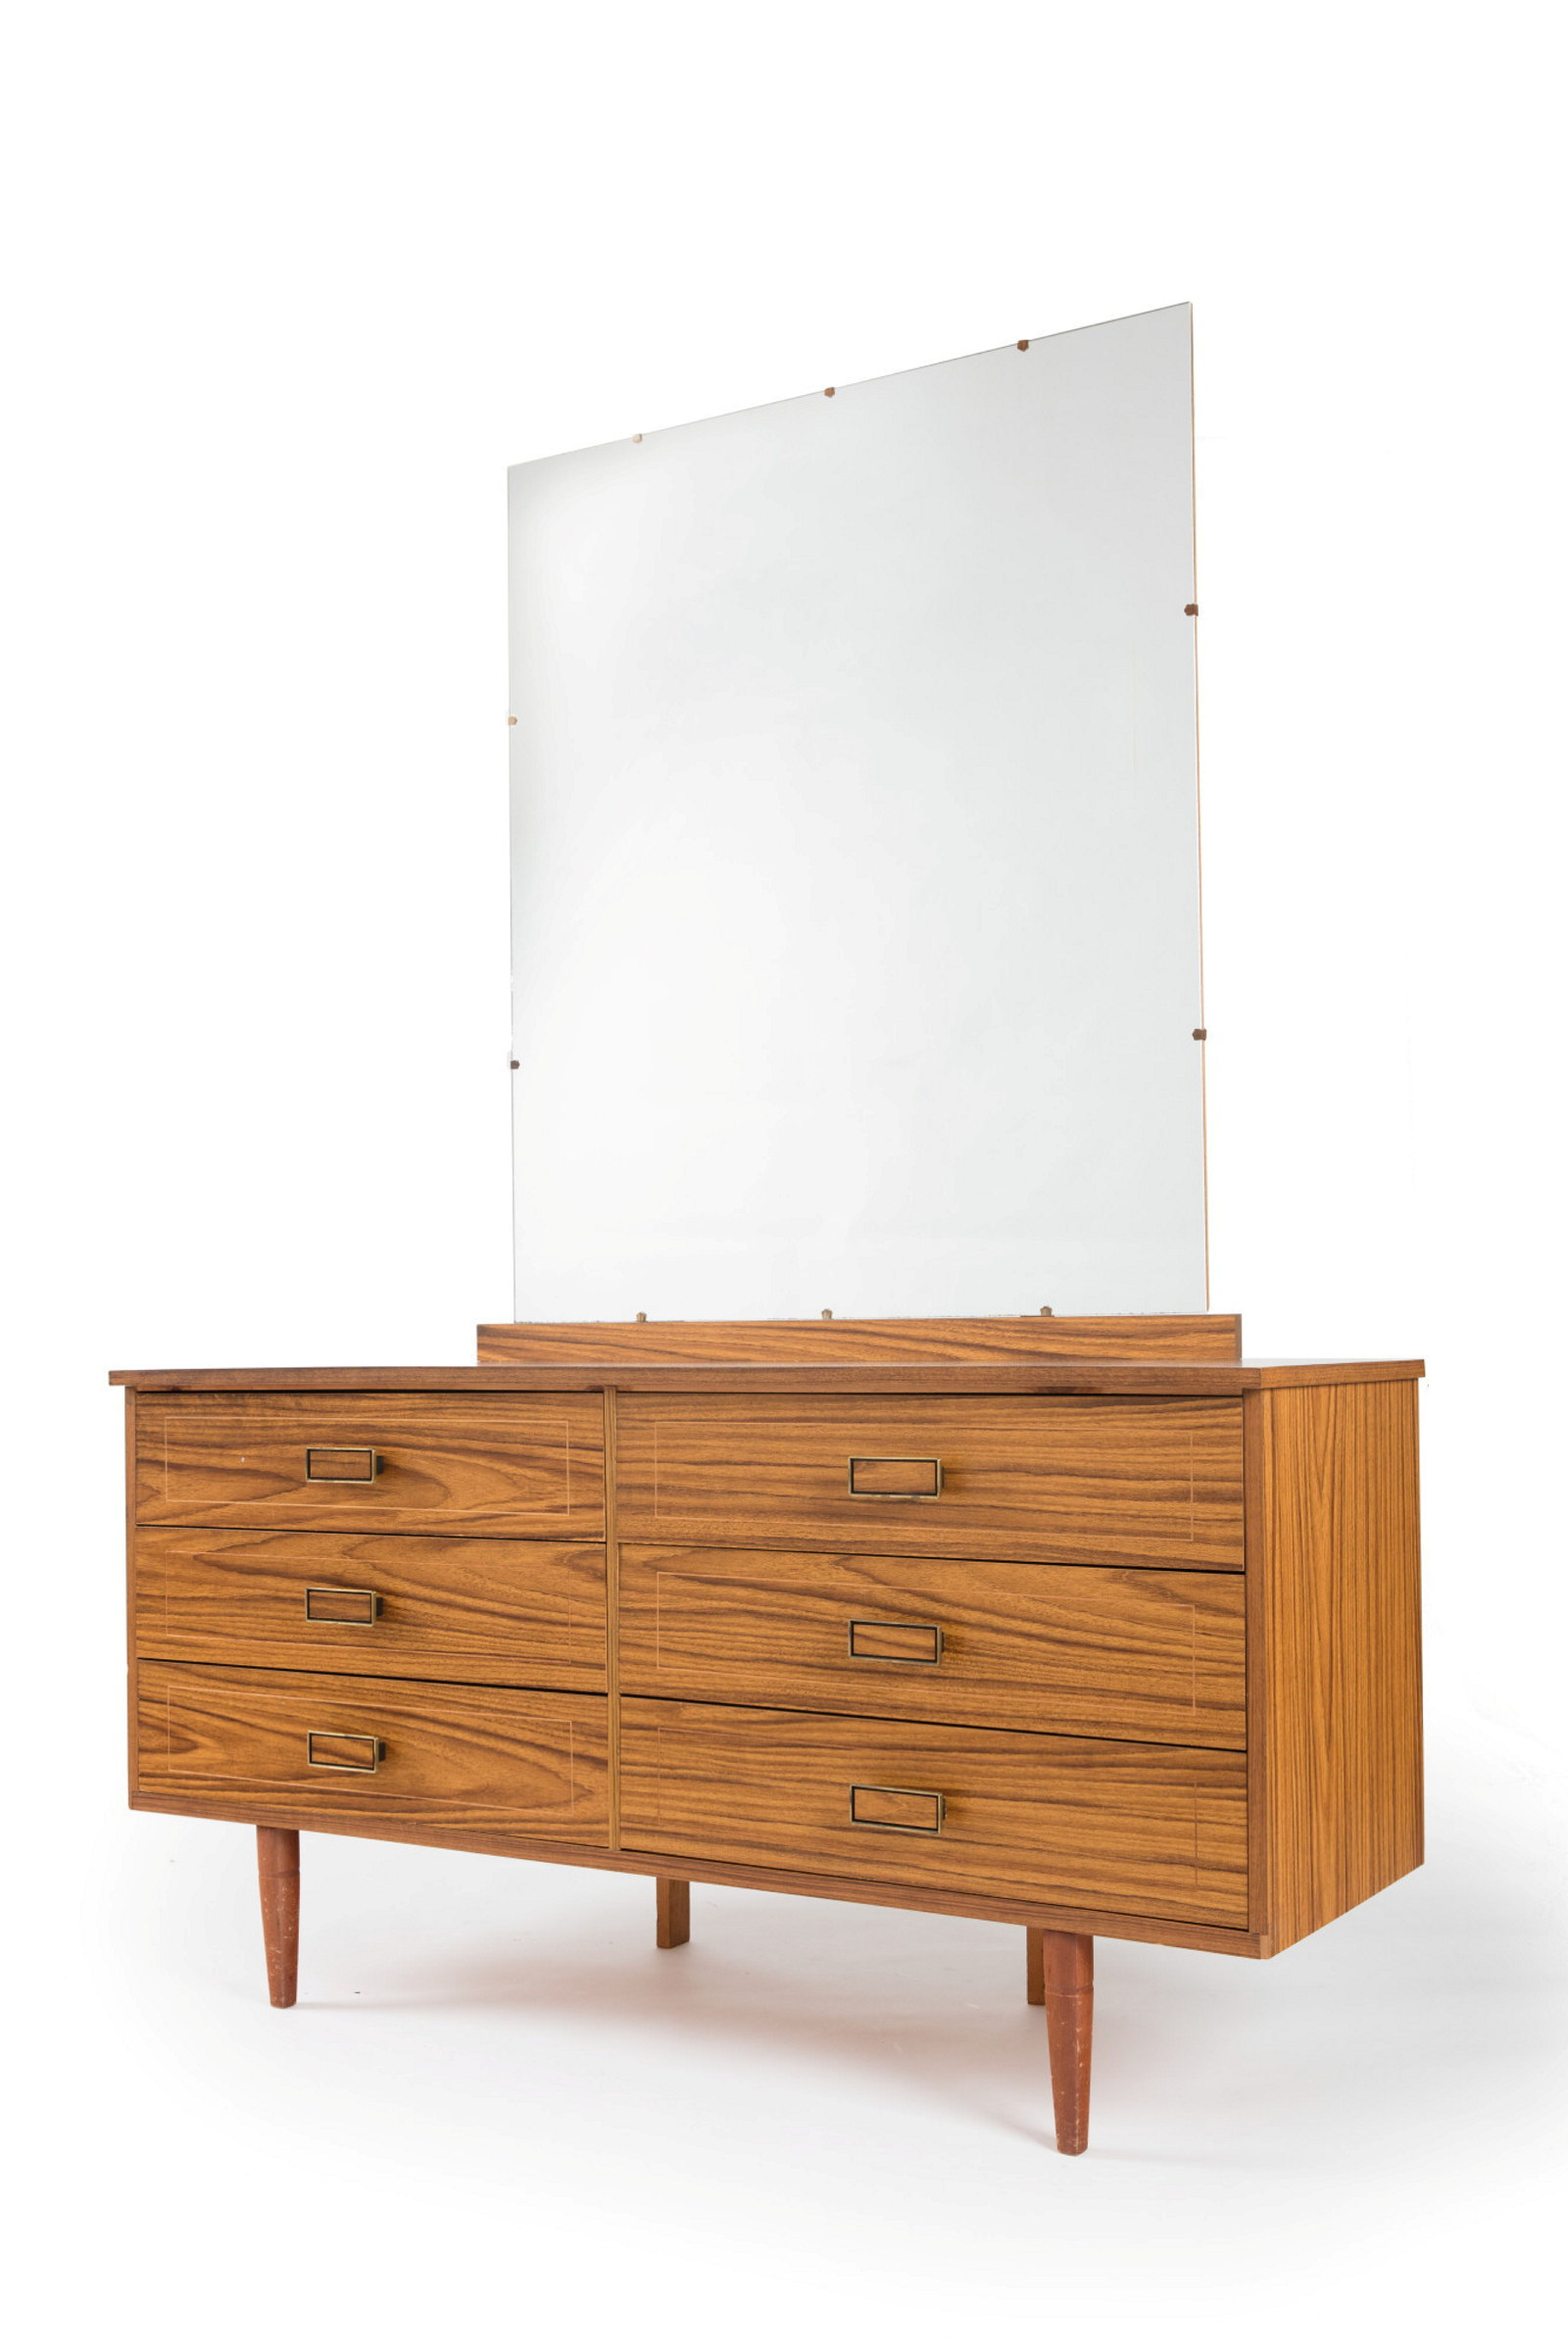 Timber chest of drawers with mirror attached above.